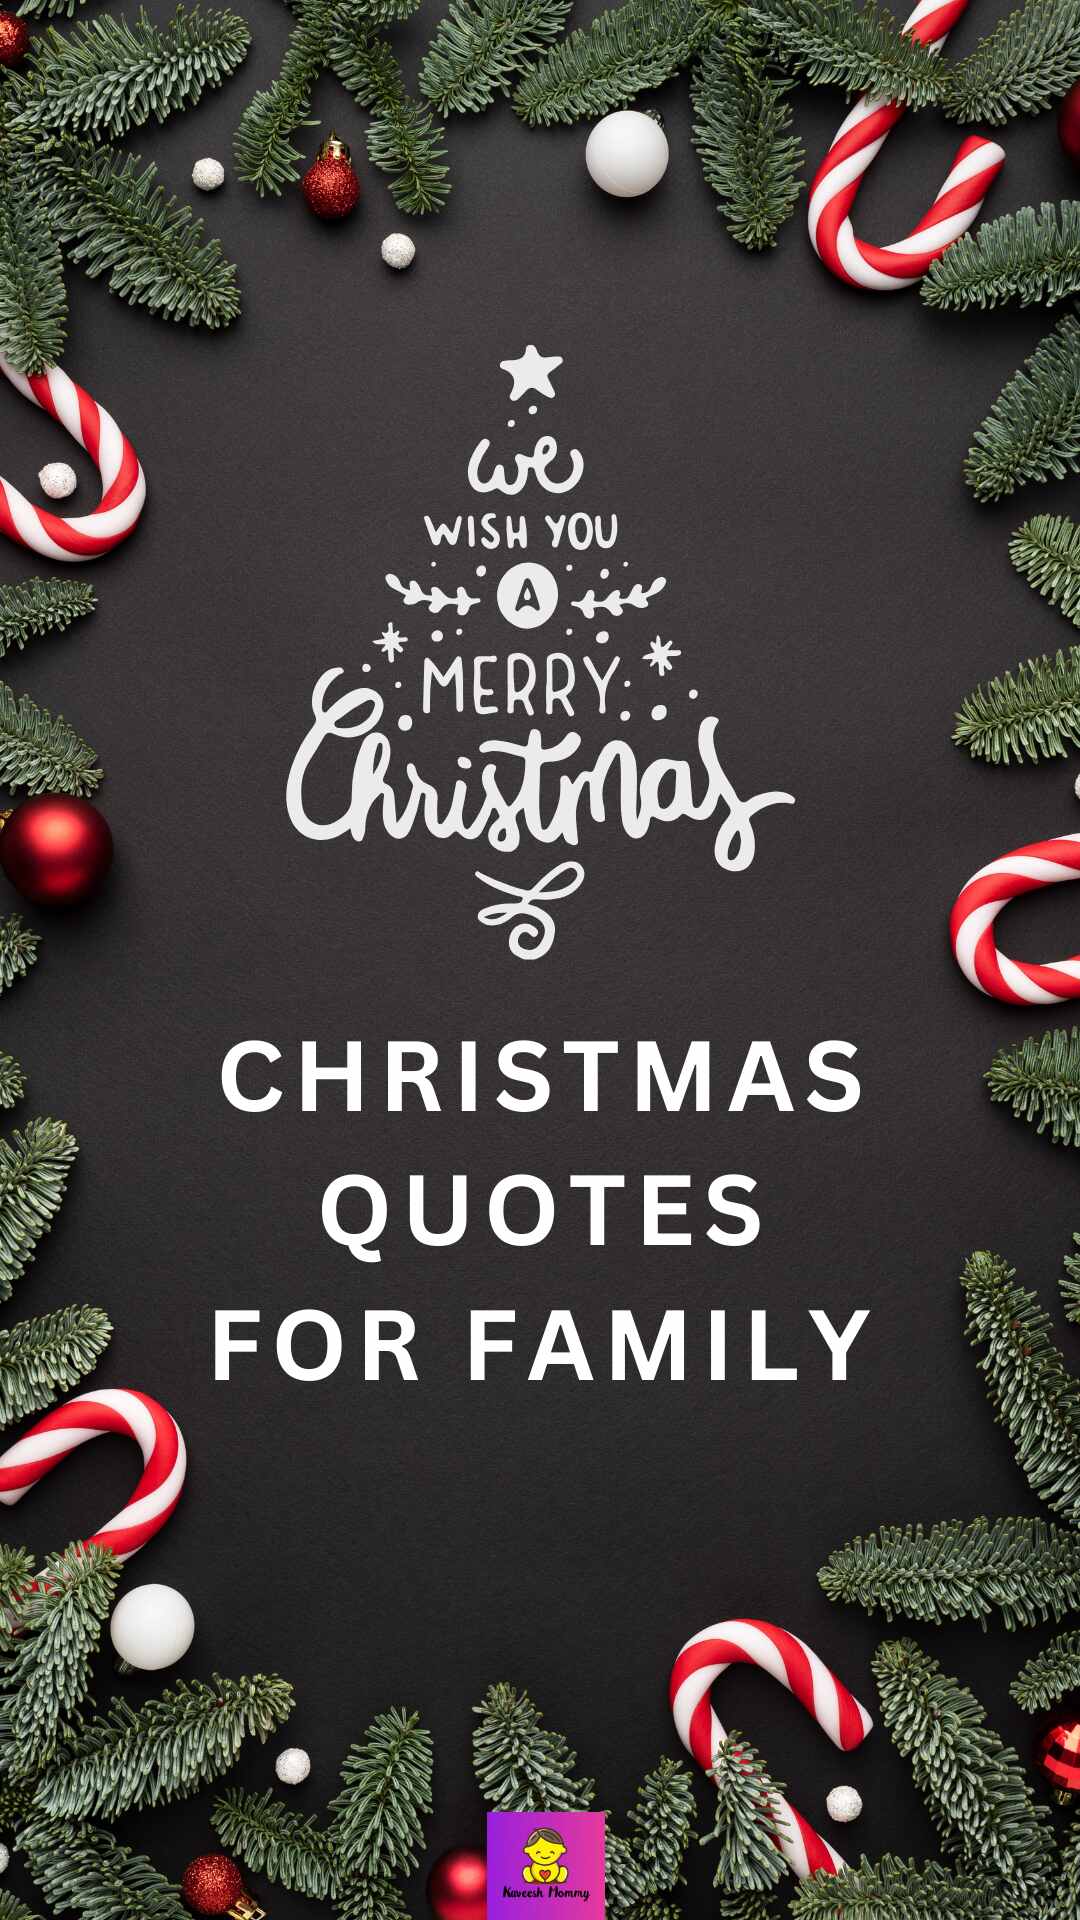 List of Christmas quotes for family